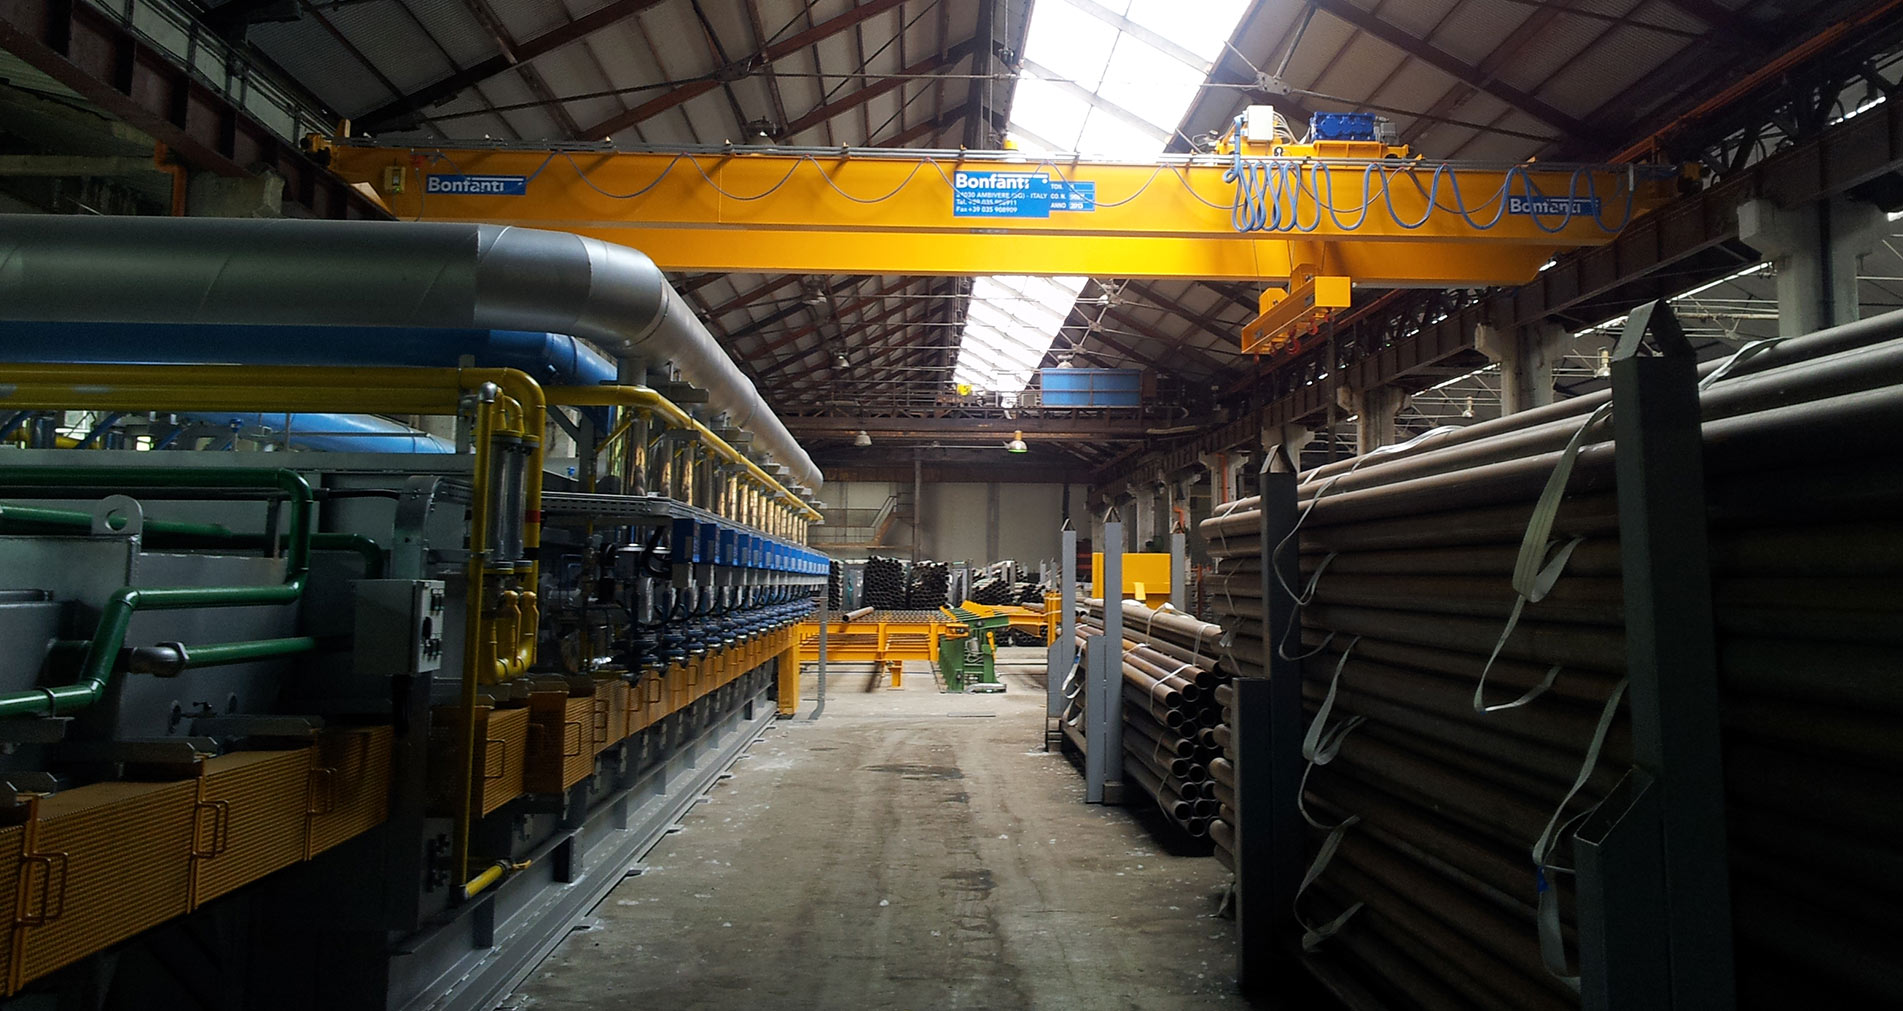 BONFANTI machineries for handling pipes and long materials